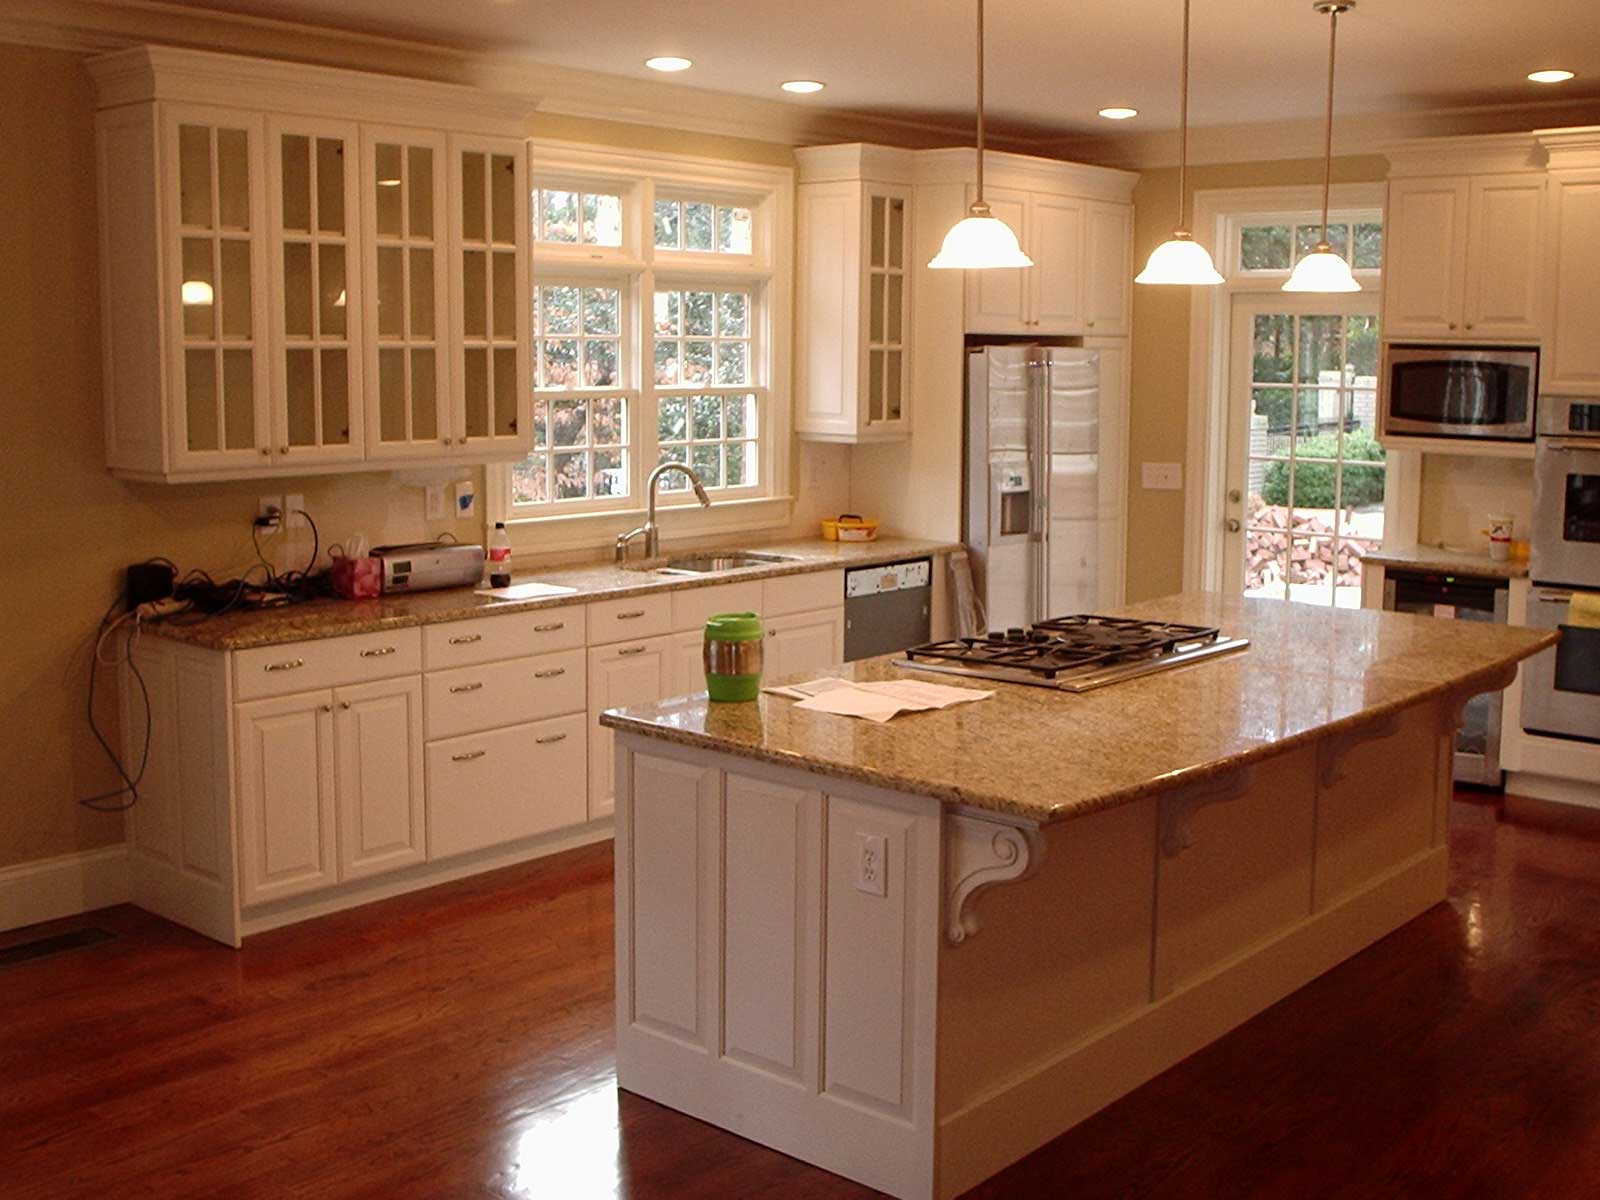 Kitchen Remodel Small Captivating Kitchen Remodel Ideas For Small House Designs With Natural Marble Countertops Design And Elegant White Cabinets Ideas Also Modern Stainless Steel Wash Basin Design Kitchen Most Popular Kitchen Layout To Emulate Your Own After